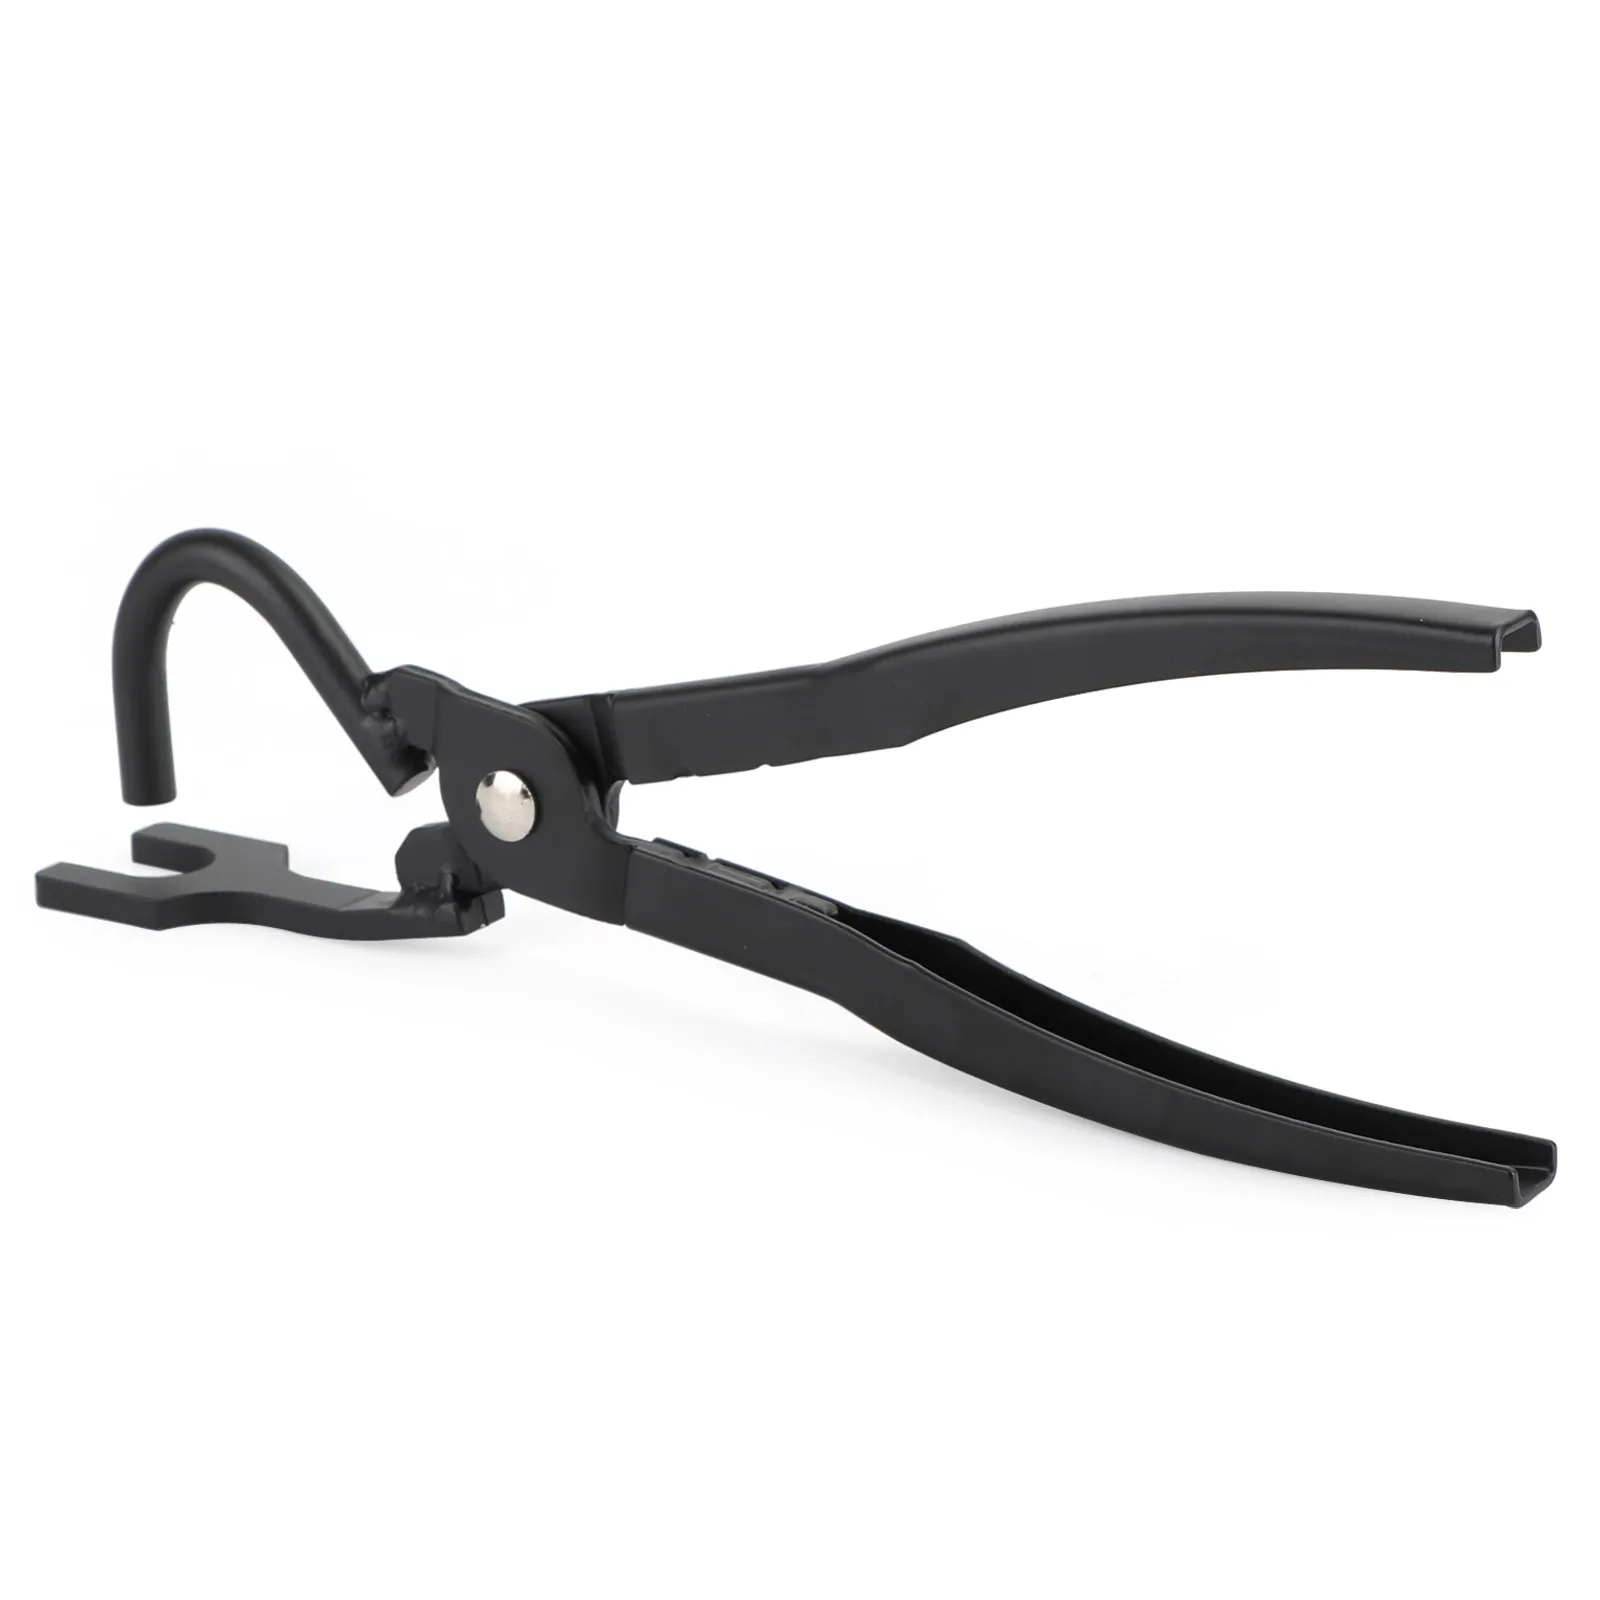 

Areyourshop 38350 Exhaust Hanger Removal Pliers Clamps for Automotive Tool Black